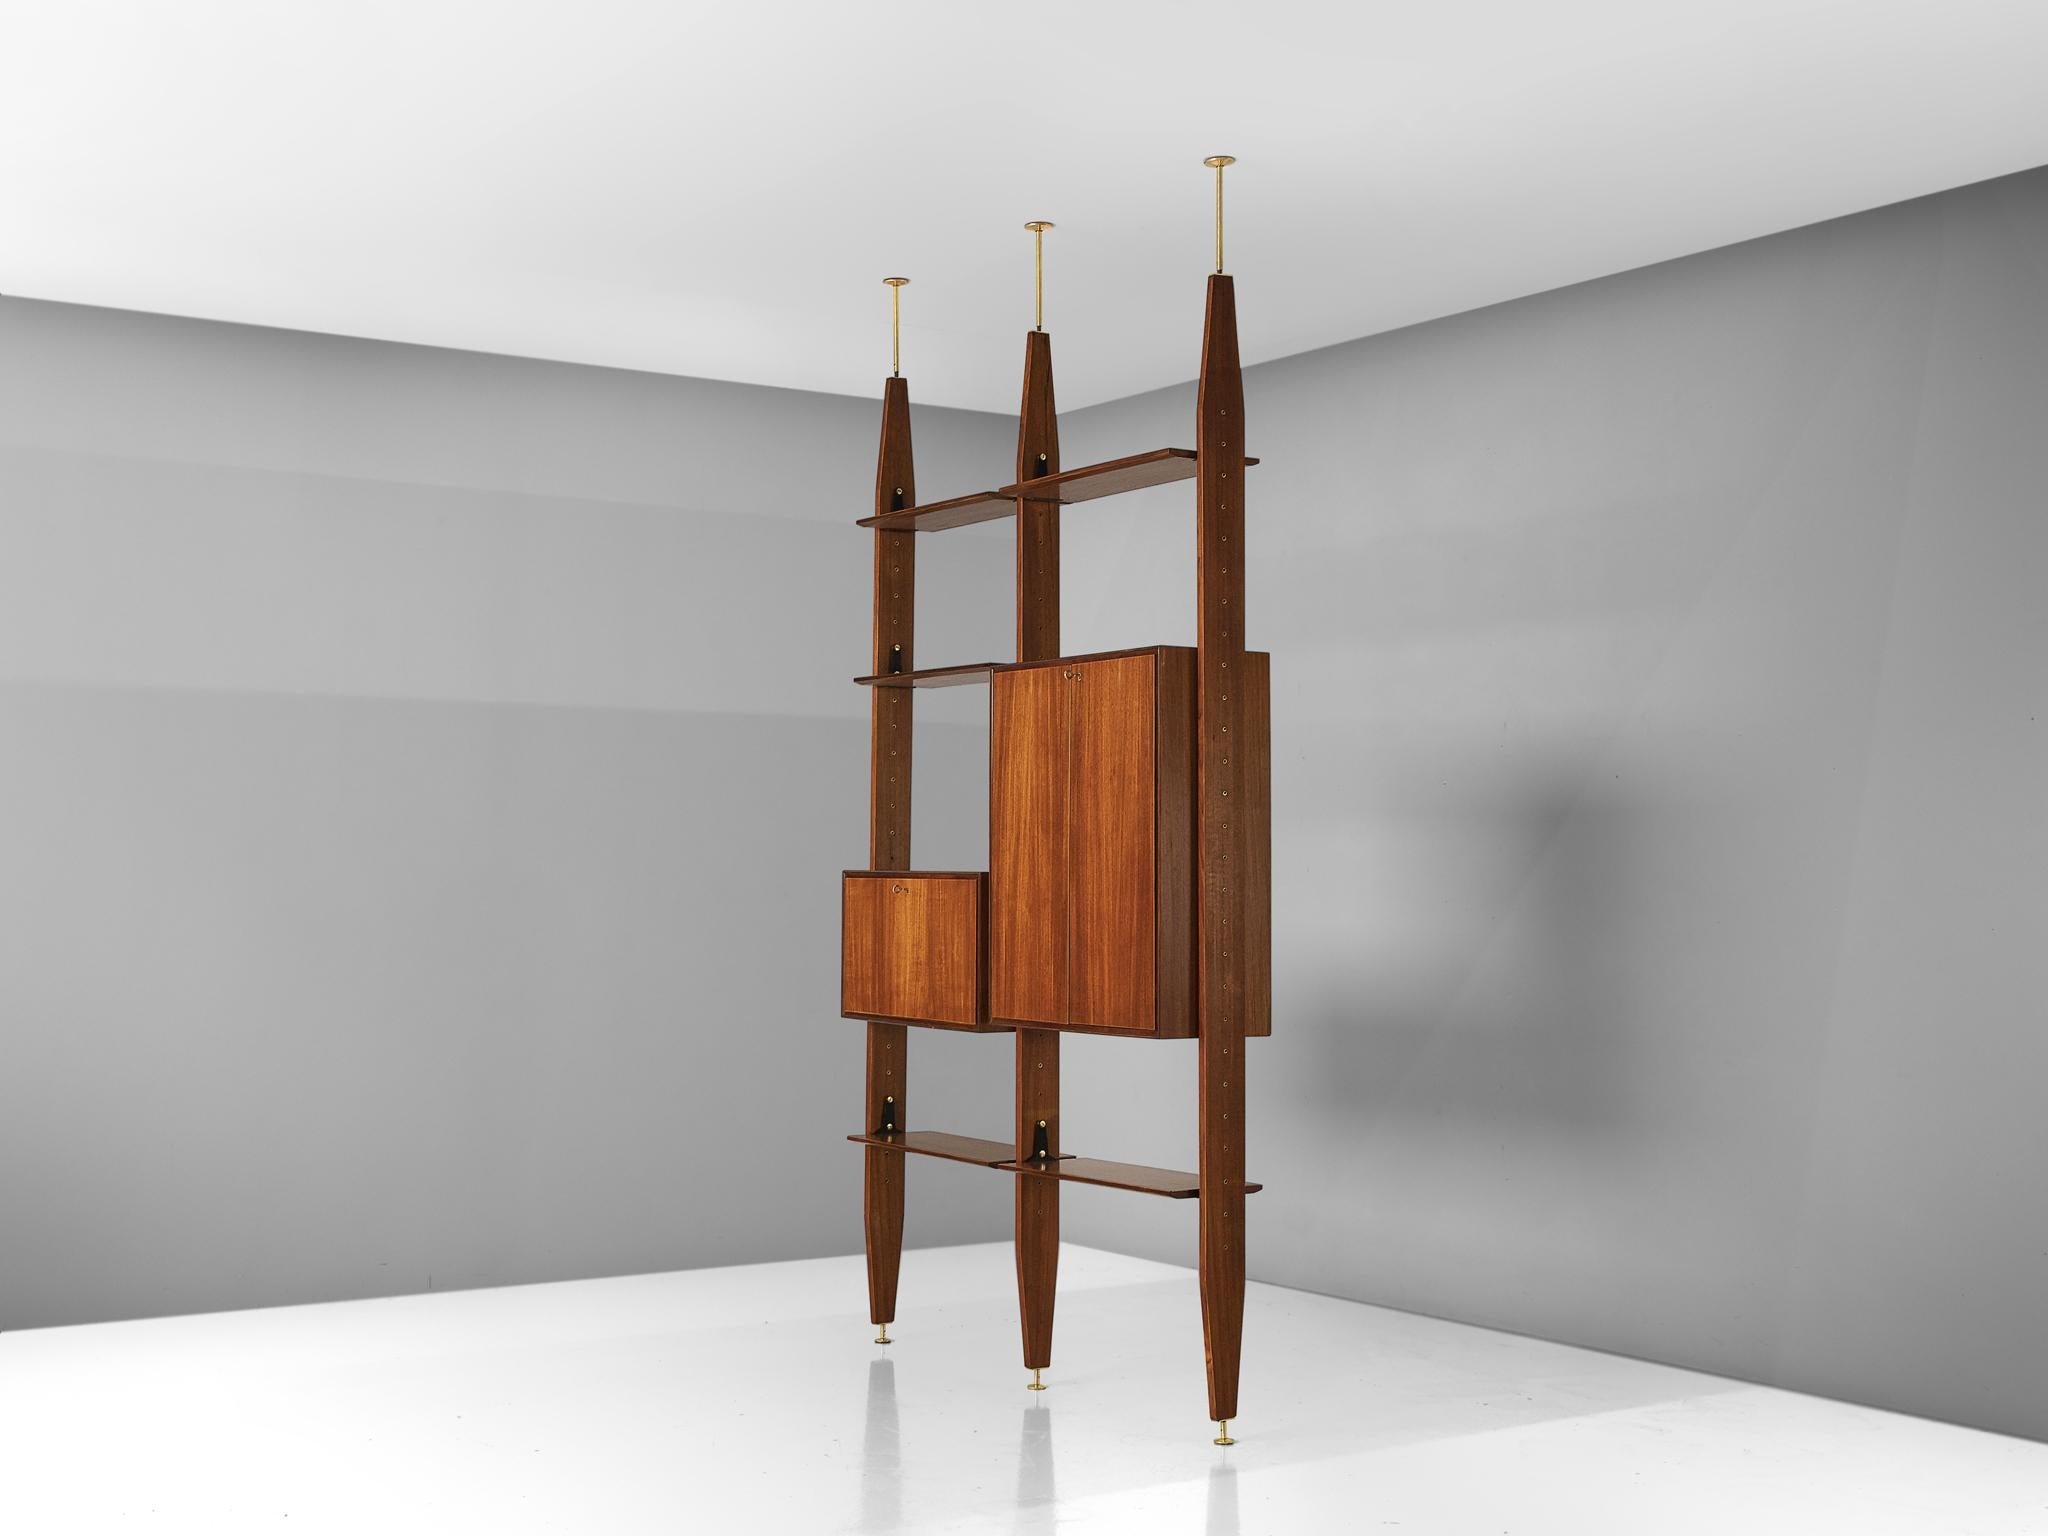 Vittorio Dassi, wall unit book shelf, in walnut and brass, Italy, 1960s.

This book shelf features a three-legged structure that can freely be fixed between the ceiling and the floor. In between the legs the shelves and storage space are adjustable